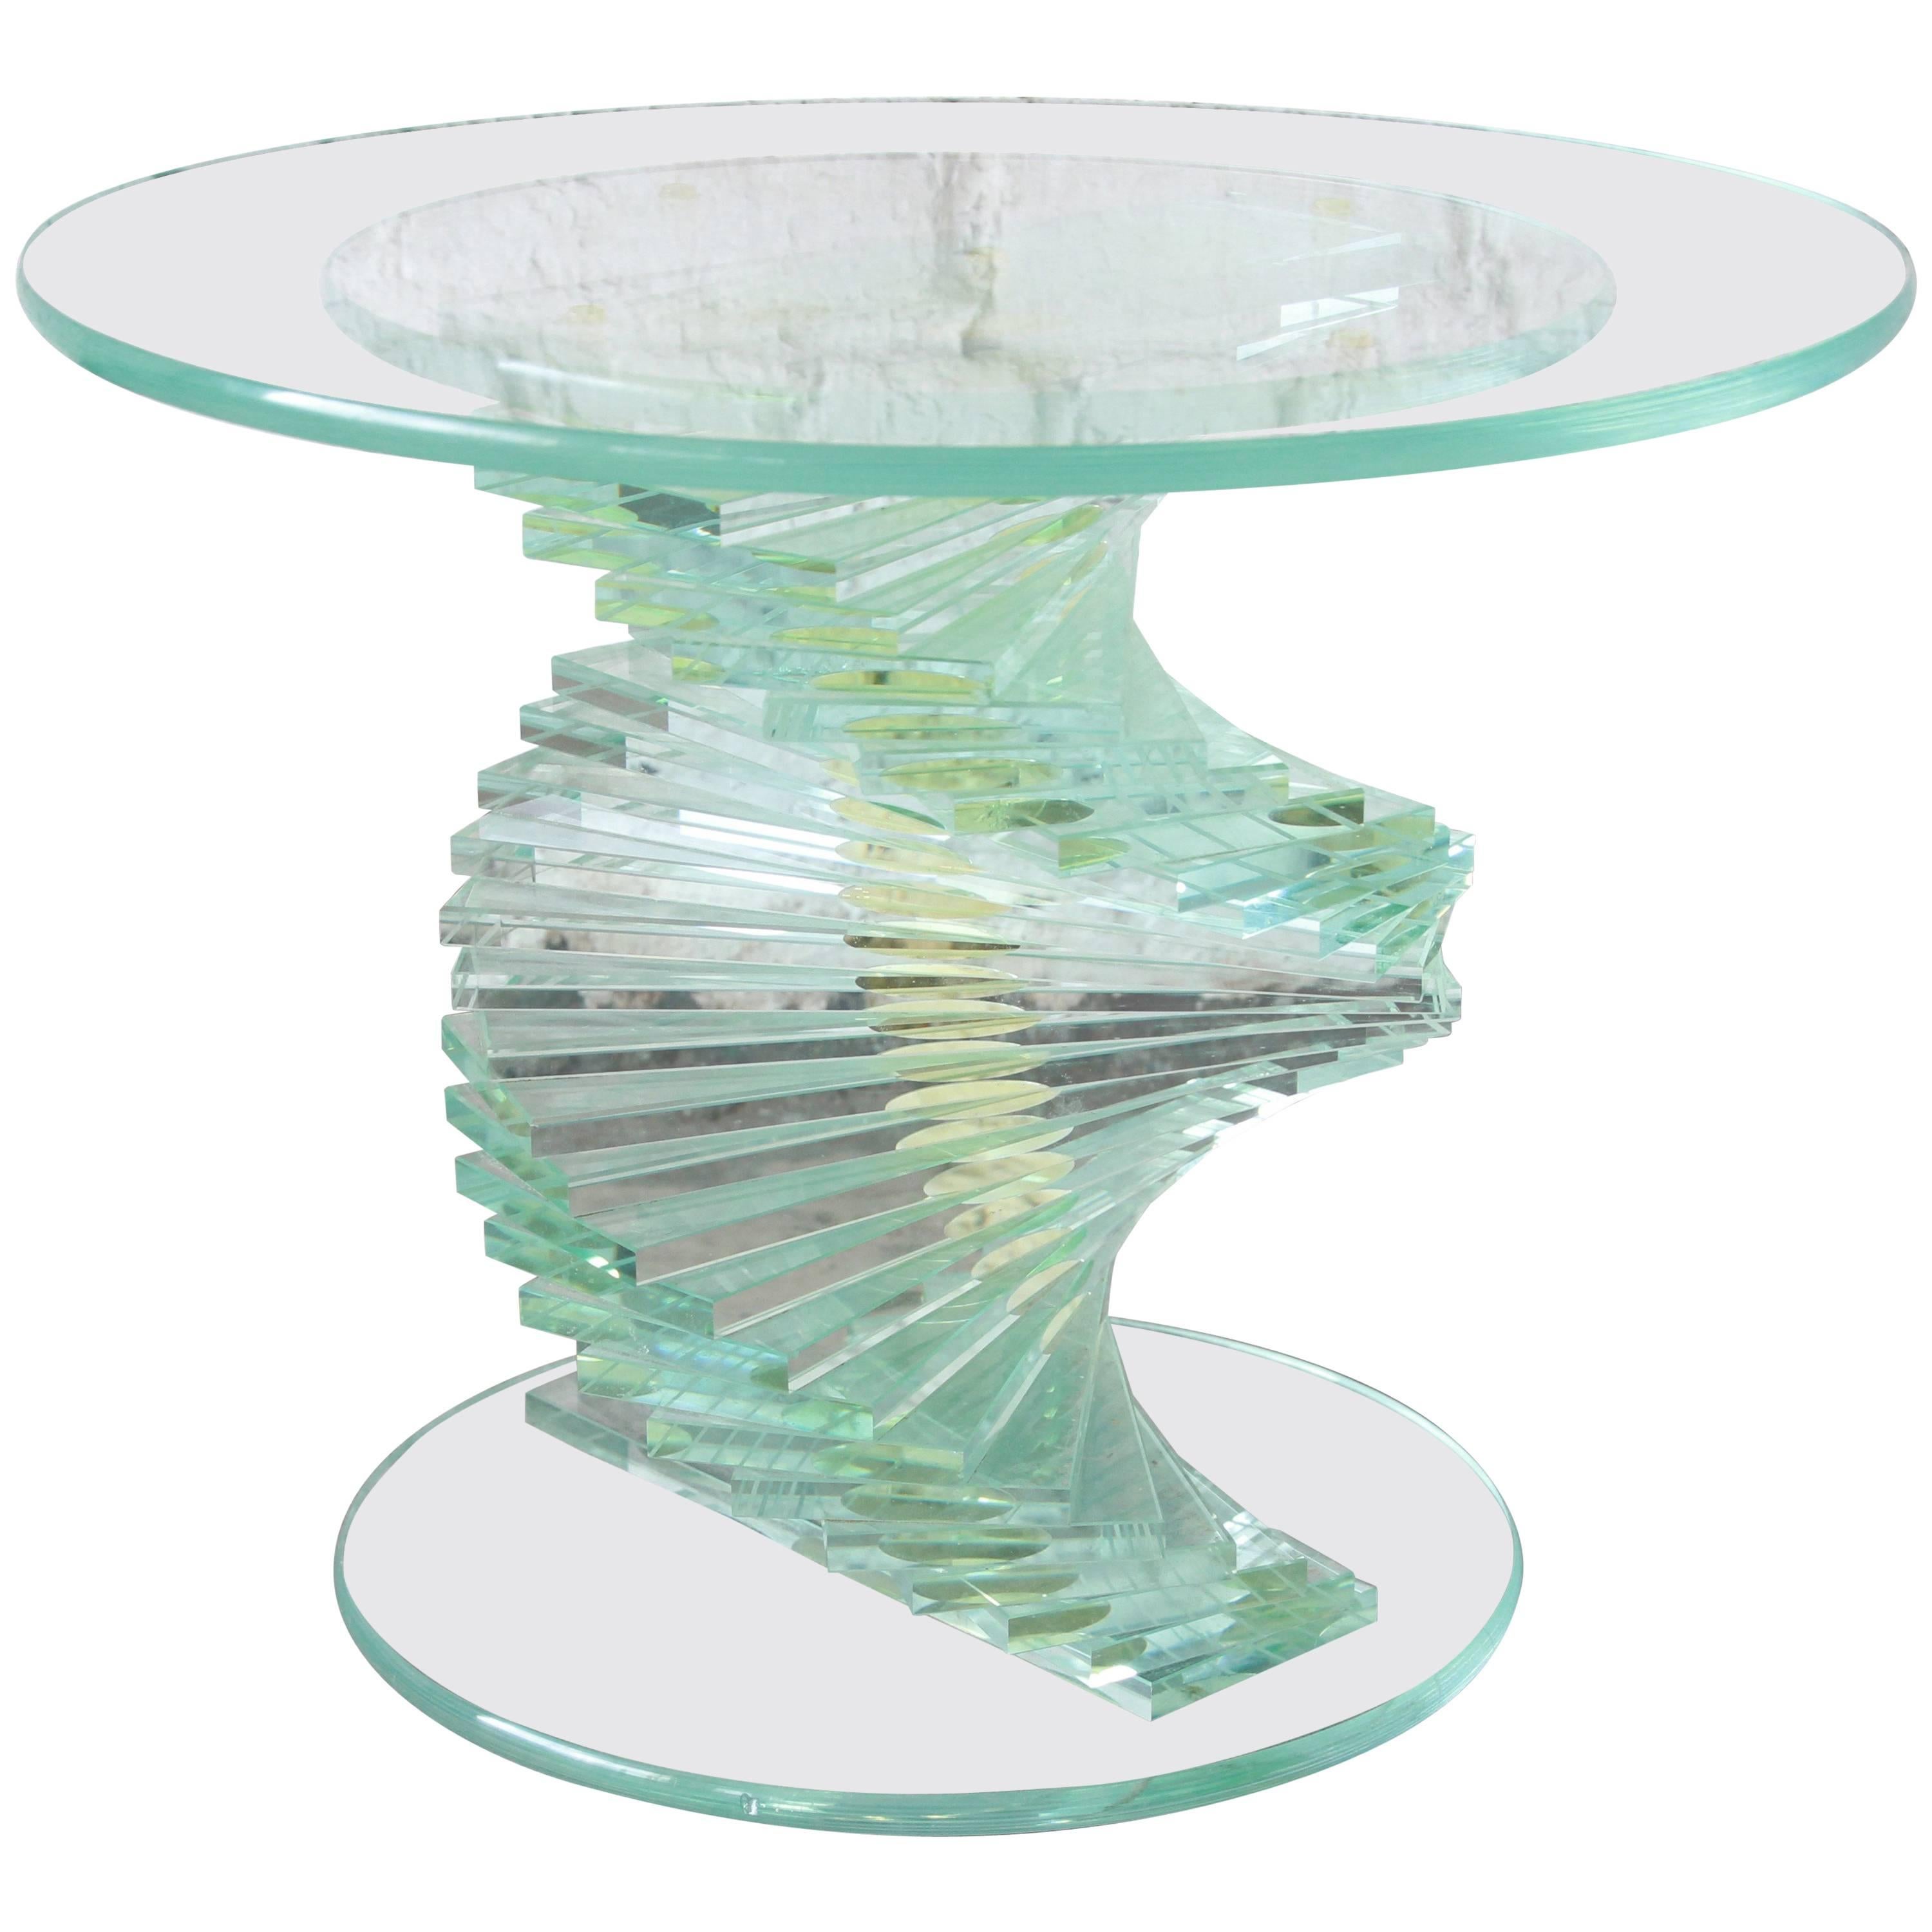 Helix Spiral Stacked Lucite and Glass Occasional Table, circa 1970s